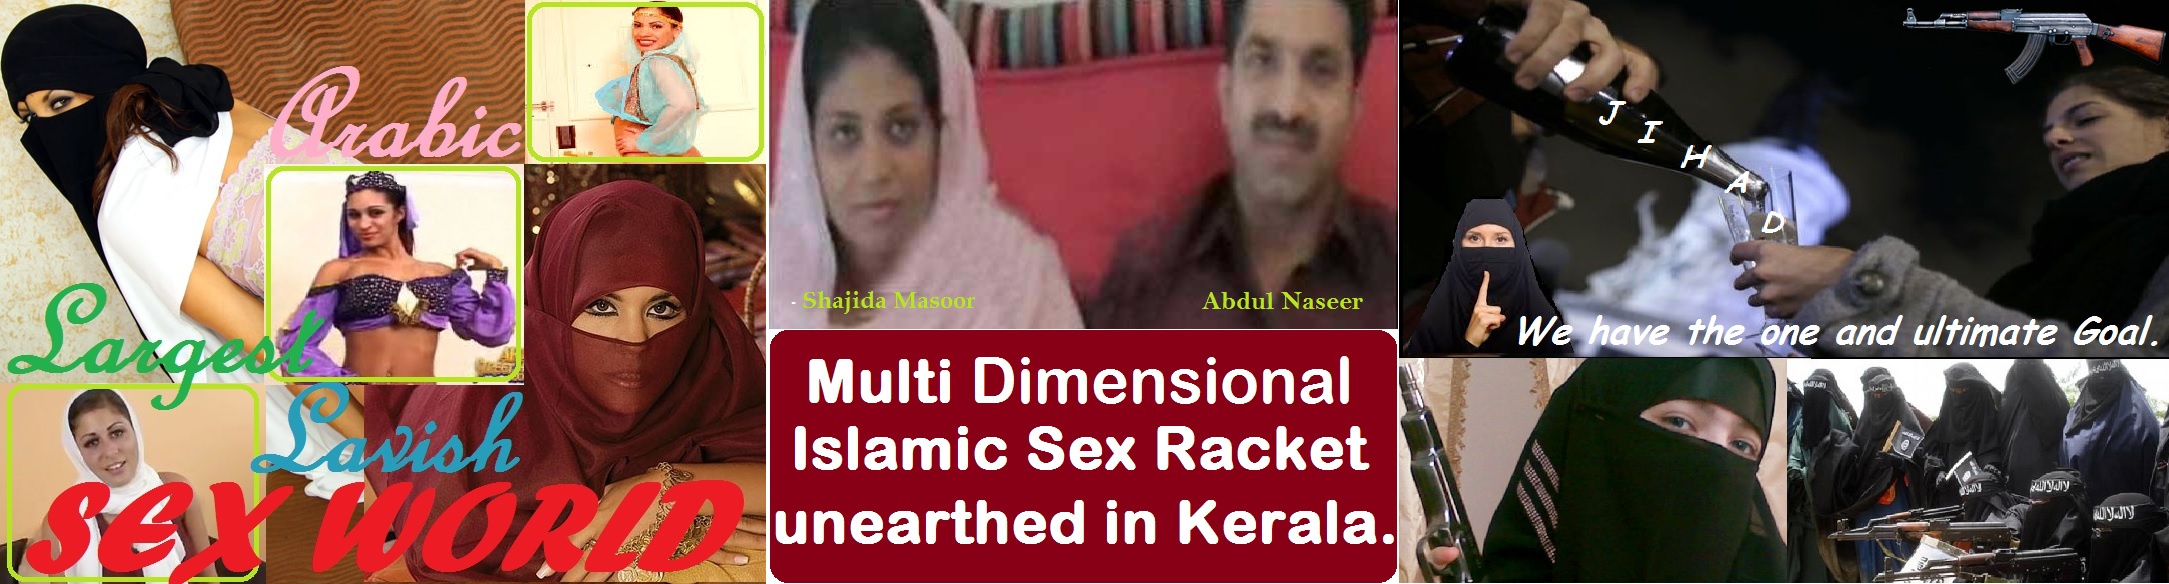 Islamic sex racket in Kerala targets Hindus and non-Muslim girls and women especially pic